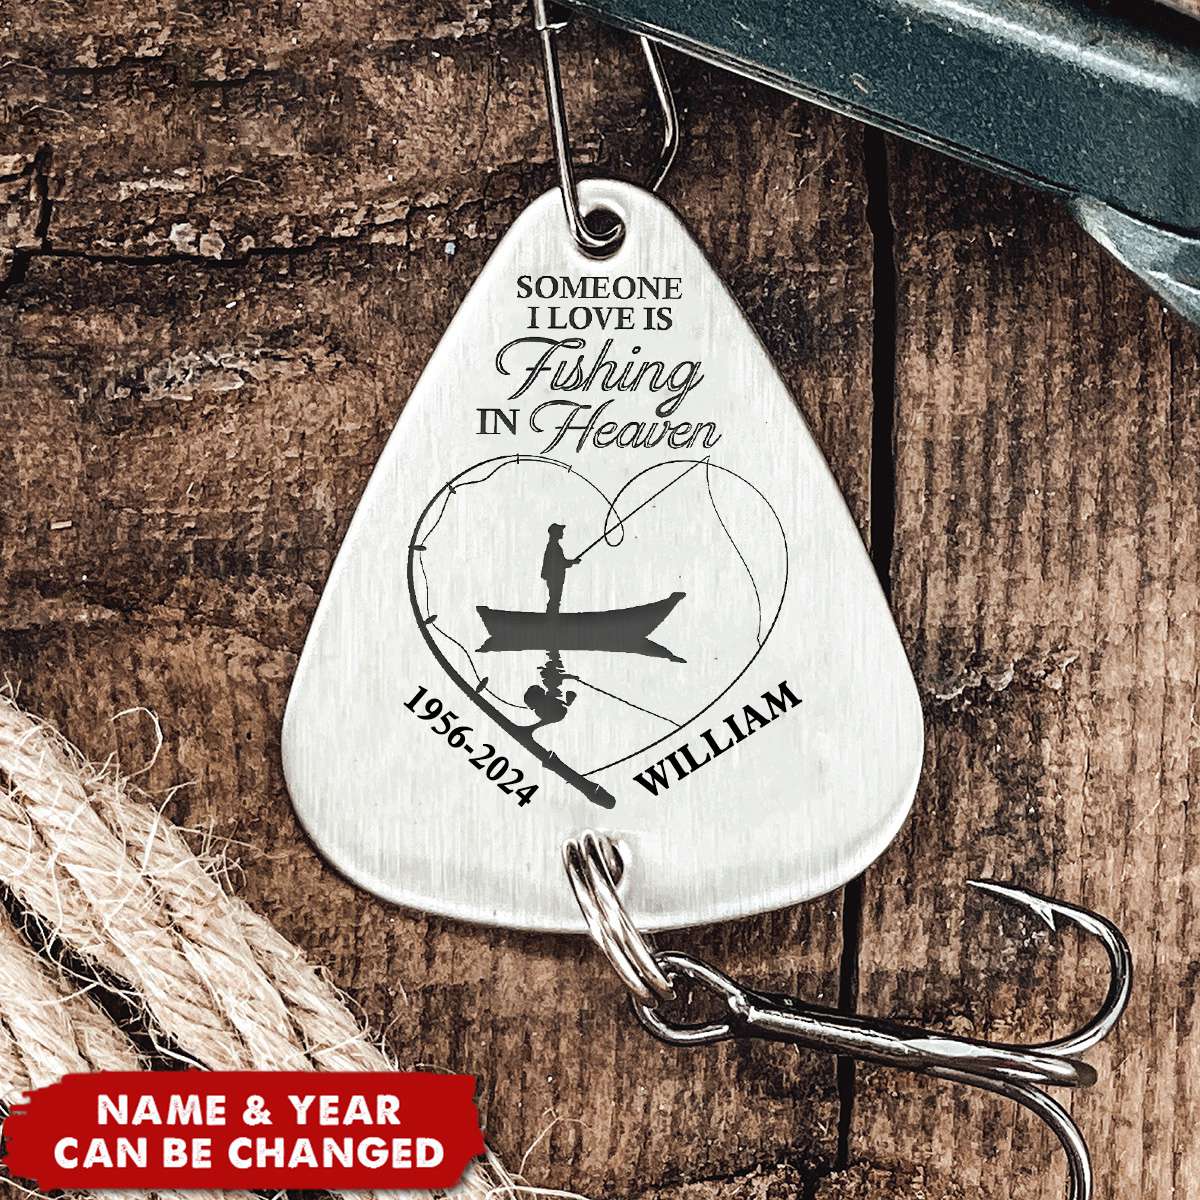 Someone I Love Is Fishing In Heaven - Personalized Fishing Lure Keychain